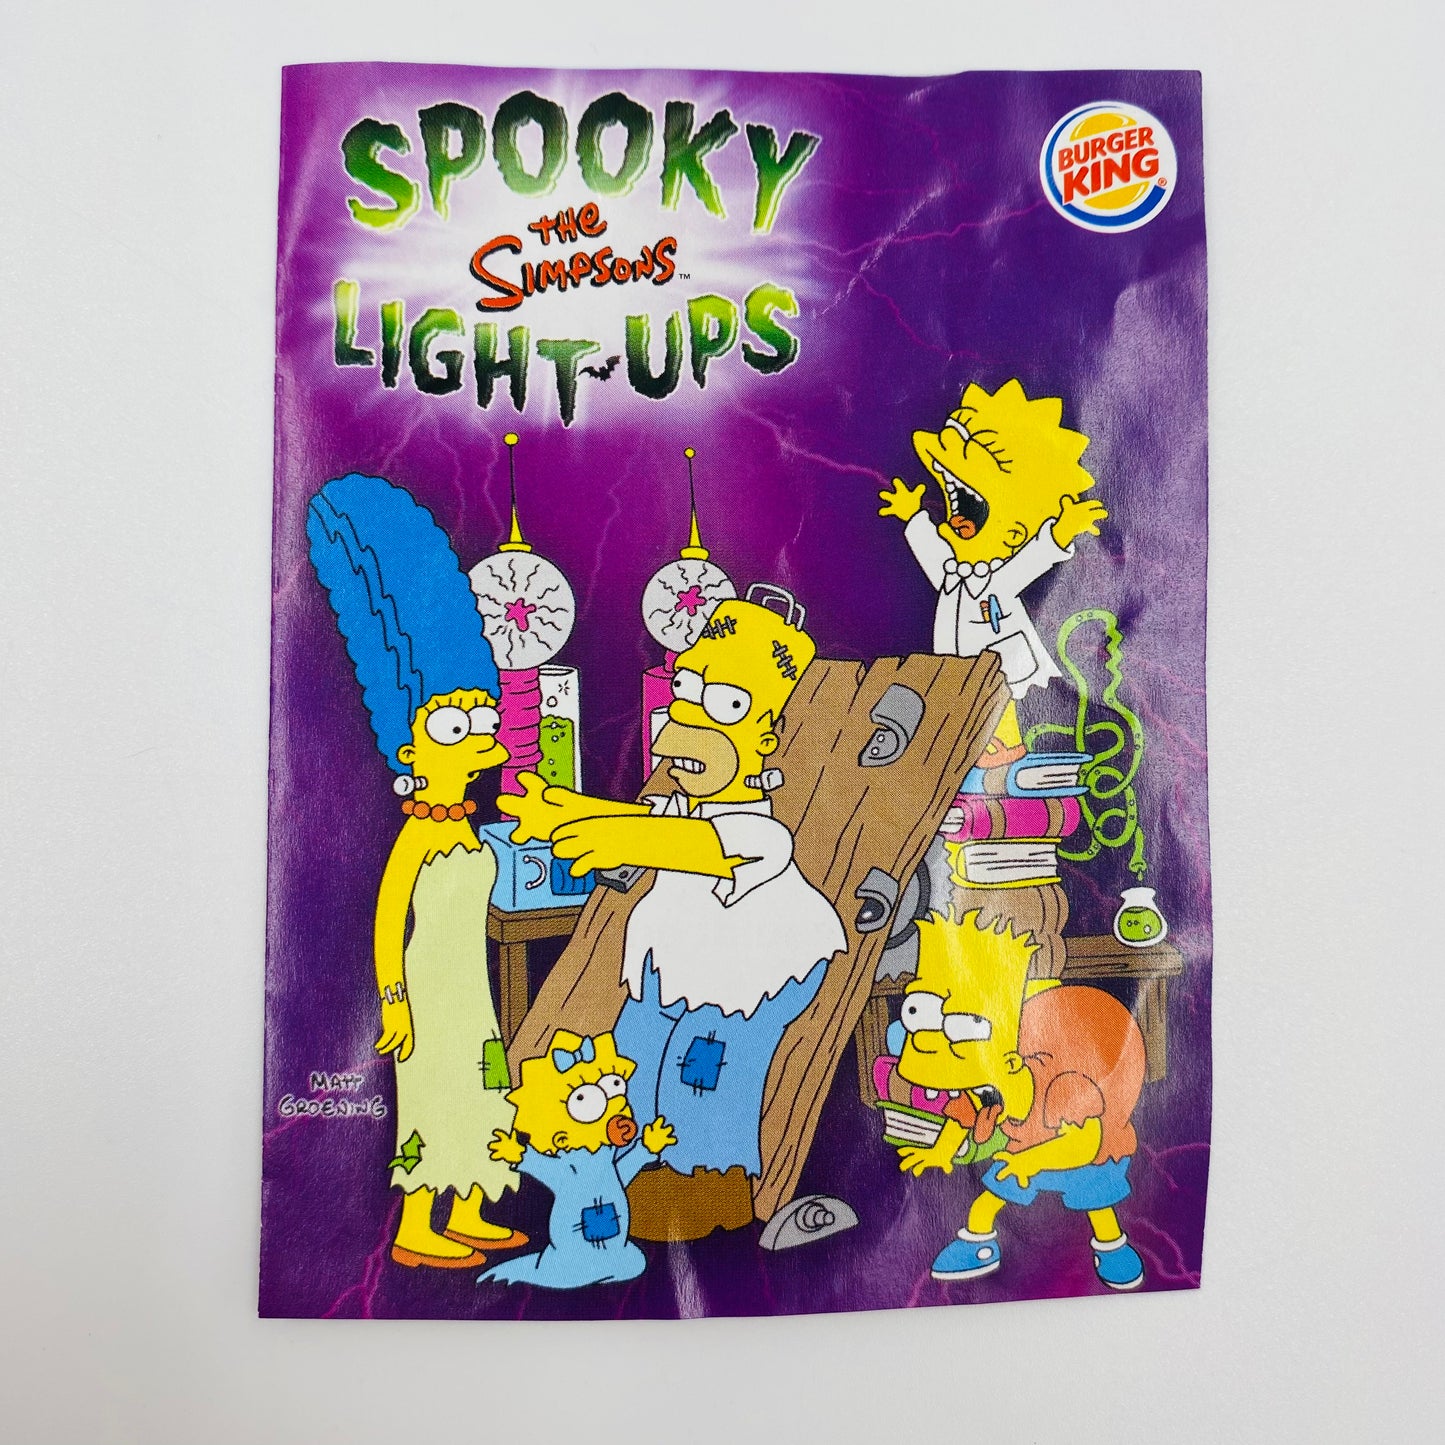 The Simpsons Spooky Light-Ups Marge Burger King Kids' Meals toy (2001) loose